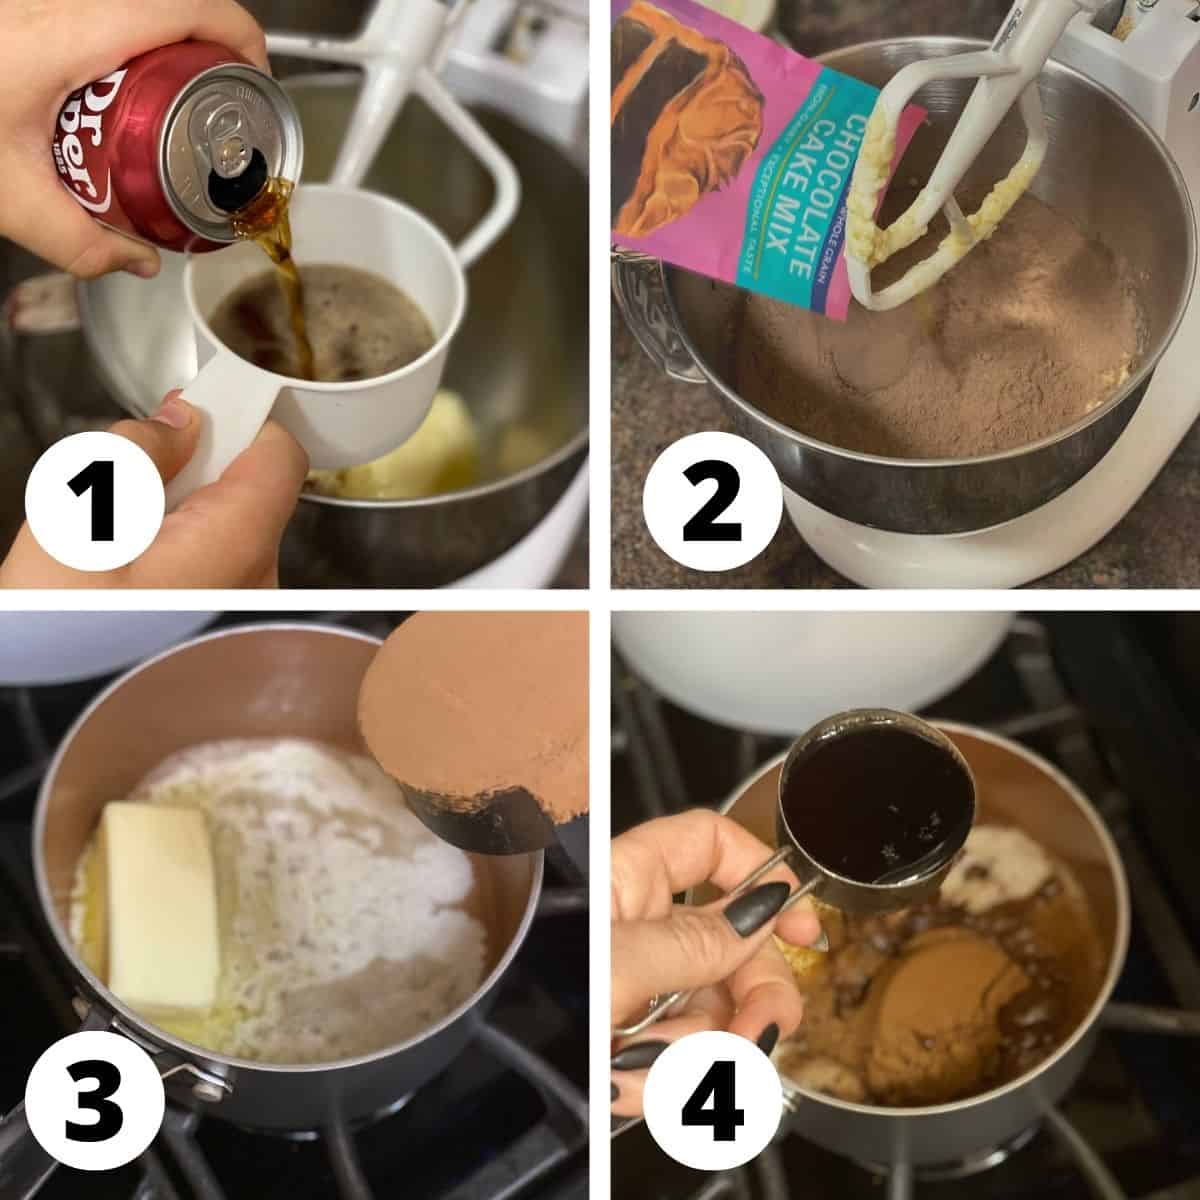 Dr Pepper Cake step by step instructions